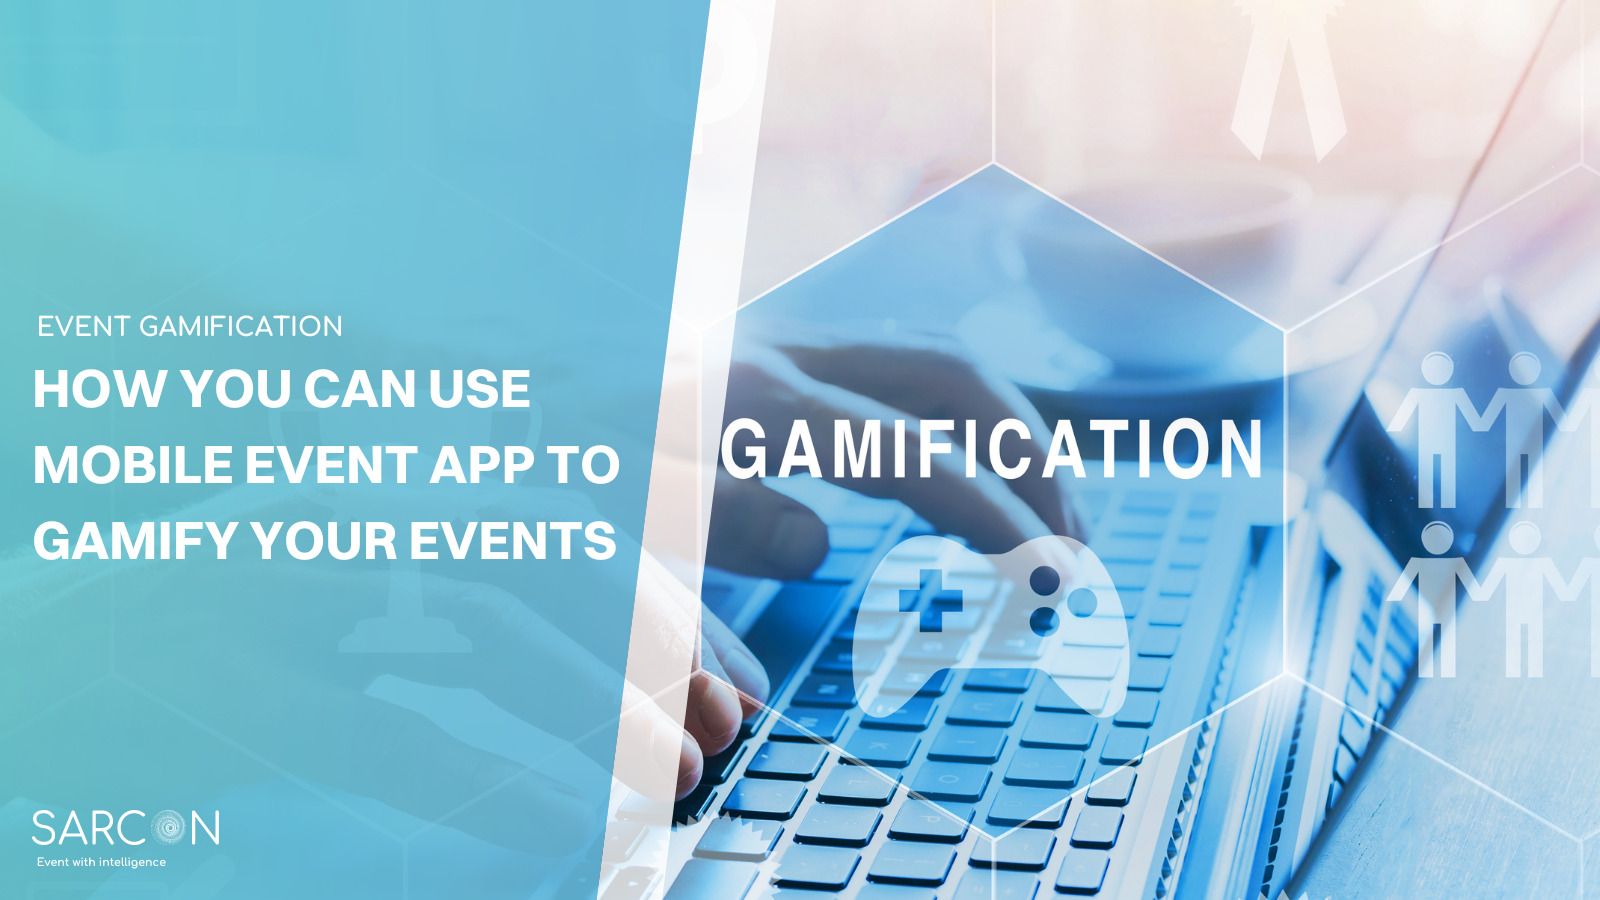 Leaderboard: Gamify Audience Participation, Increase Event App ROI